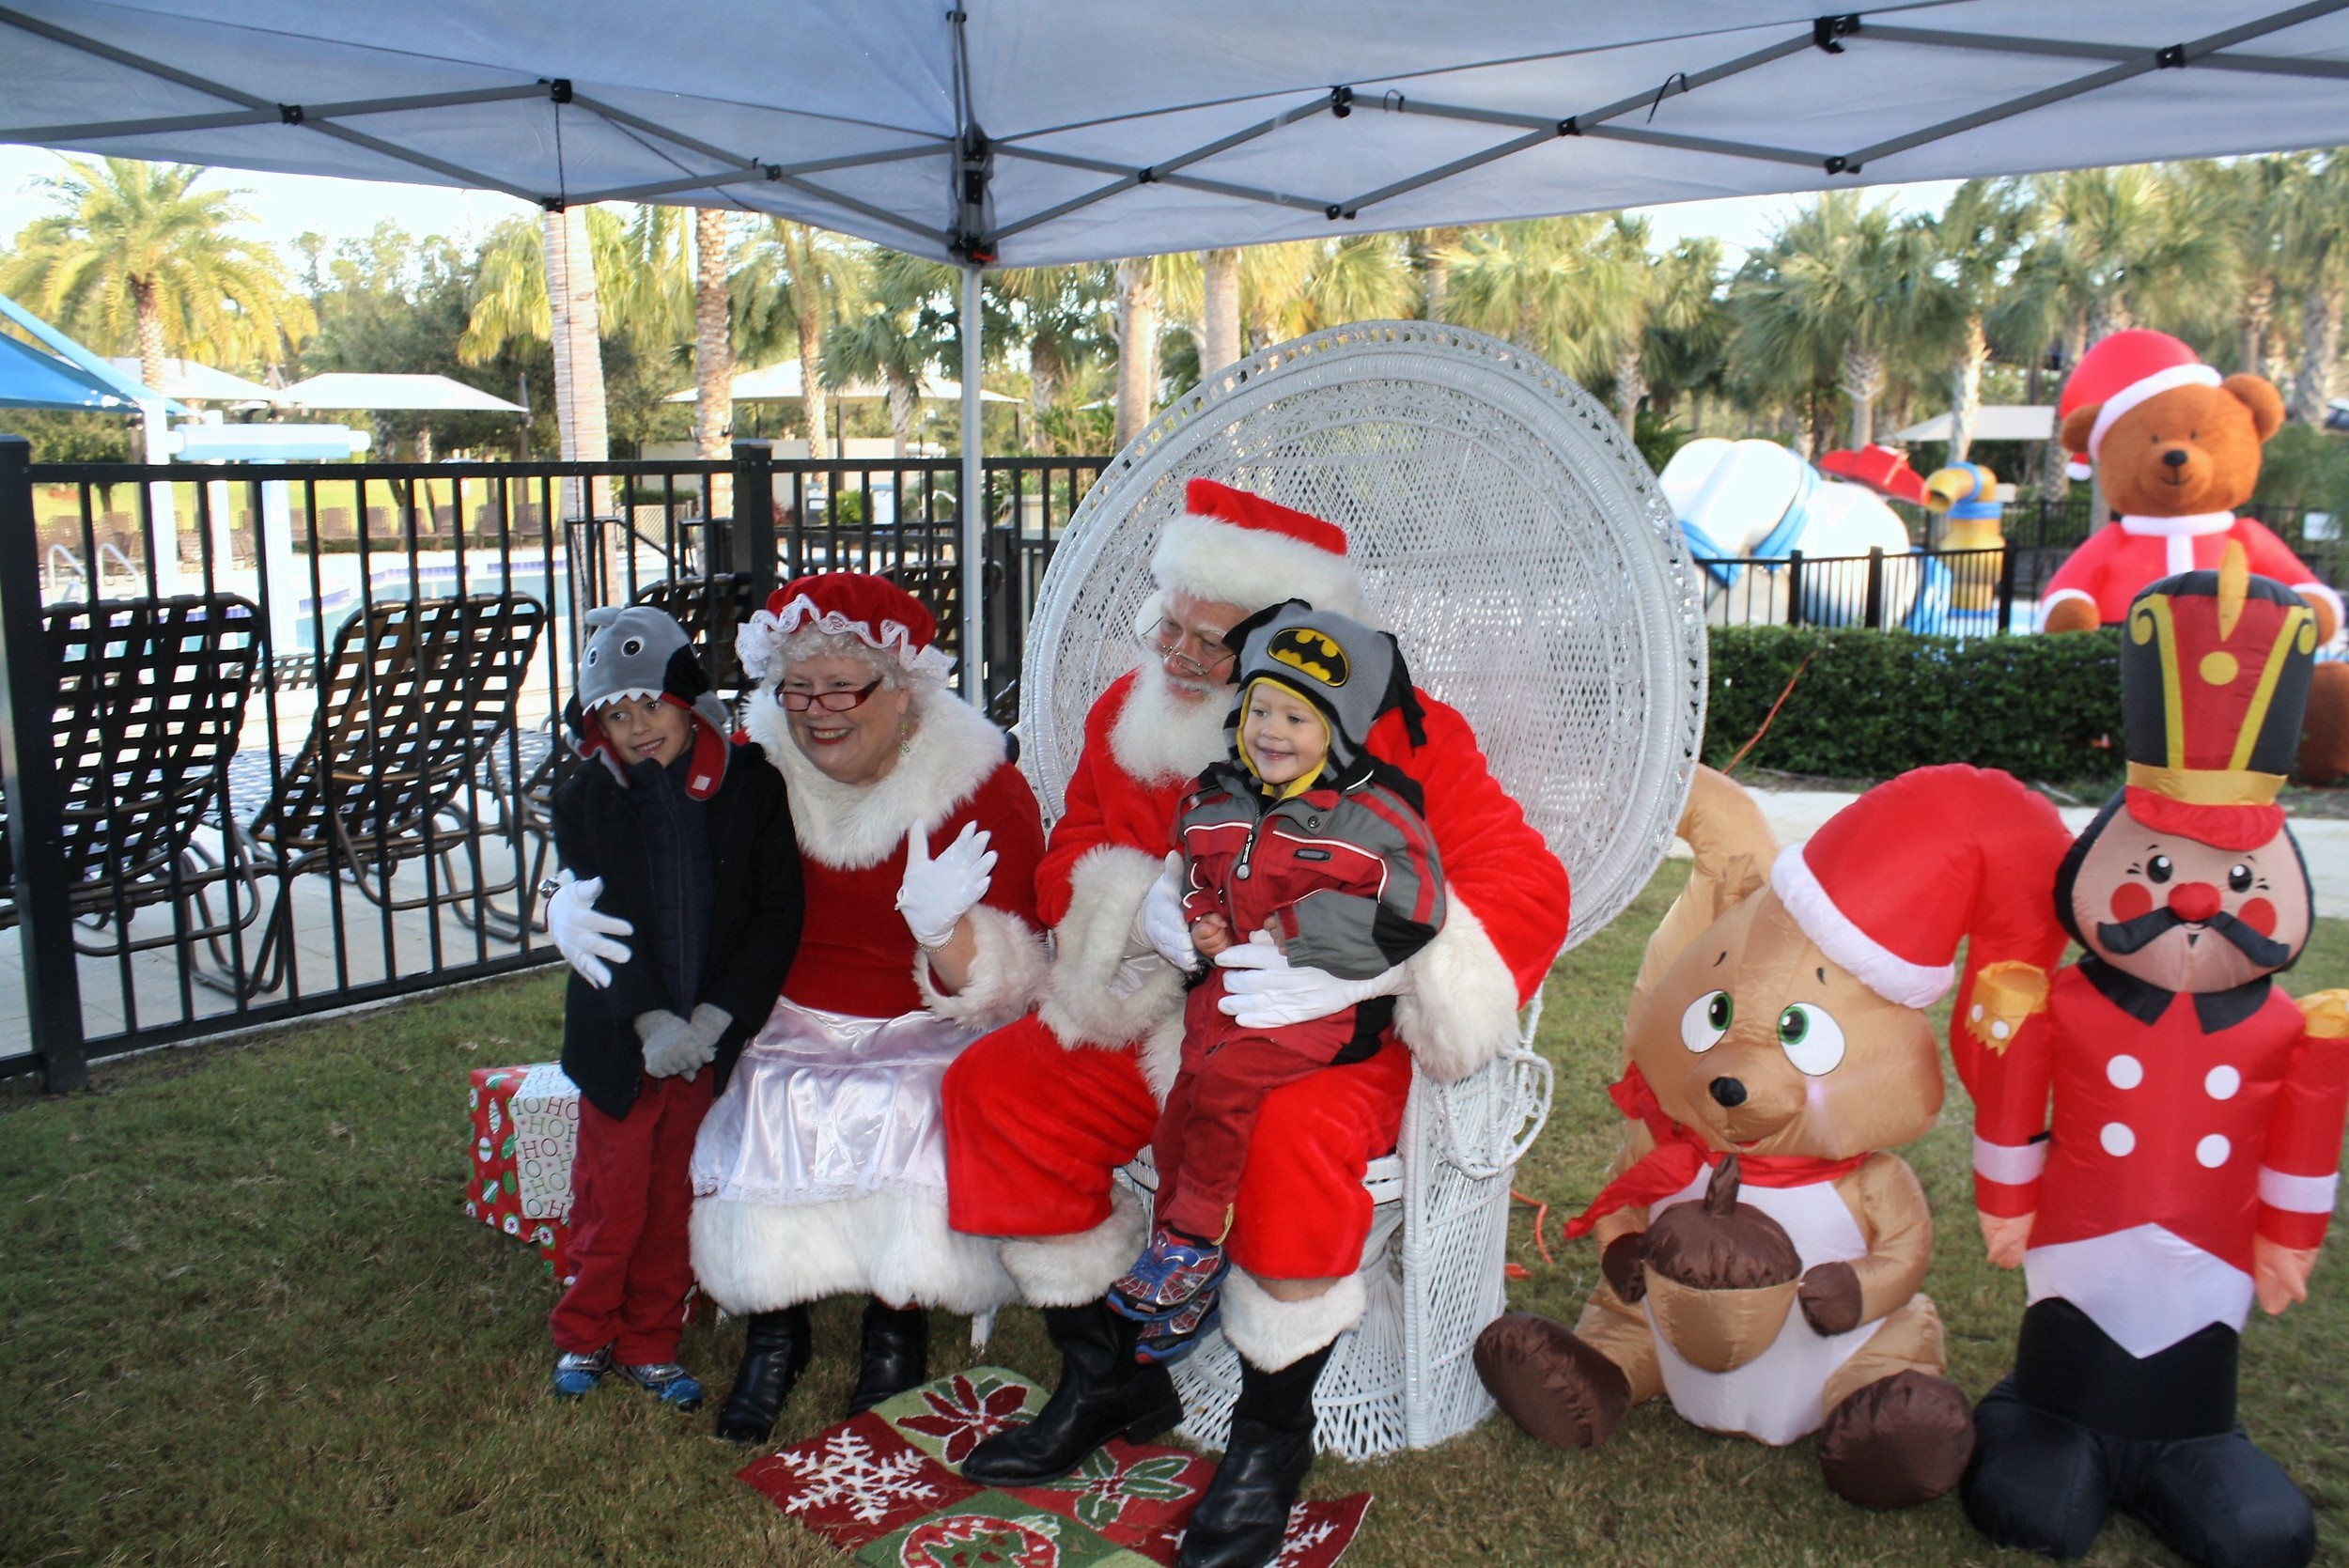 Benjamin and Nicholas Coltvet of Nocatee’s Willowcove neighborhood visit with Santa and Mrs. Claus.